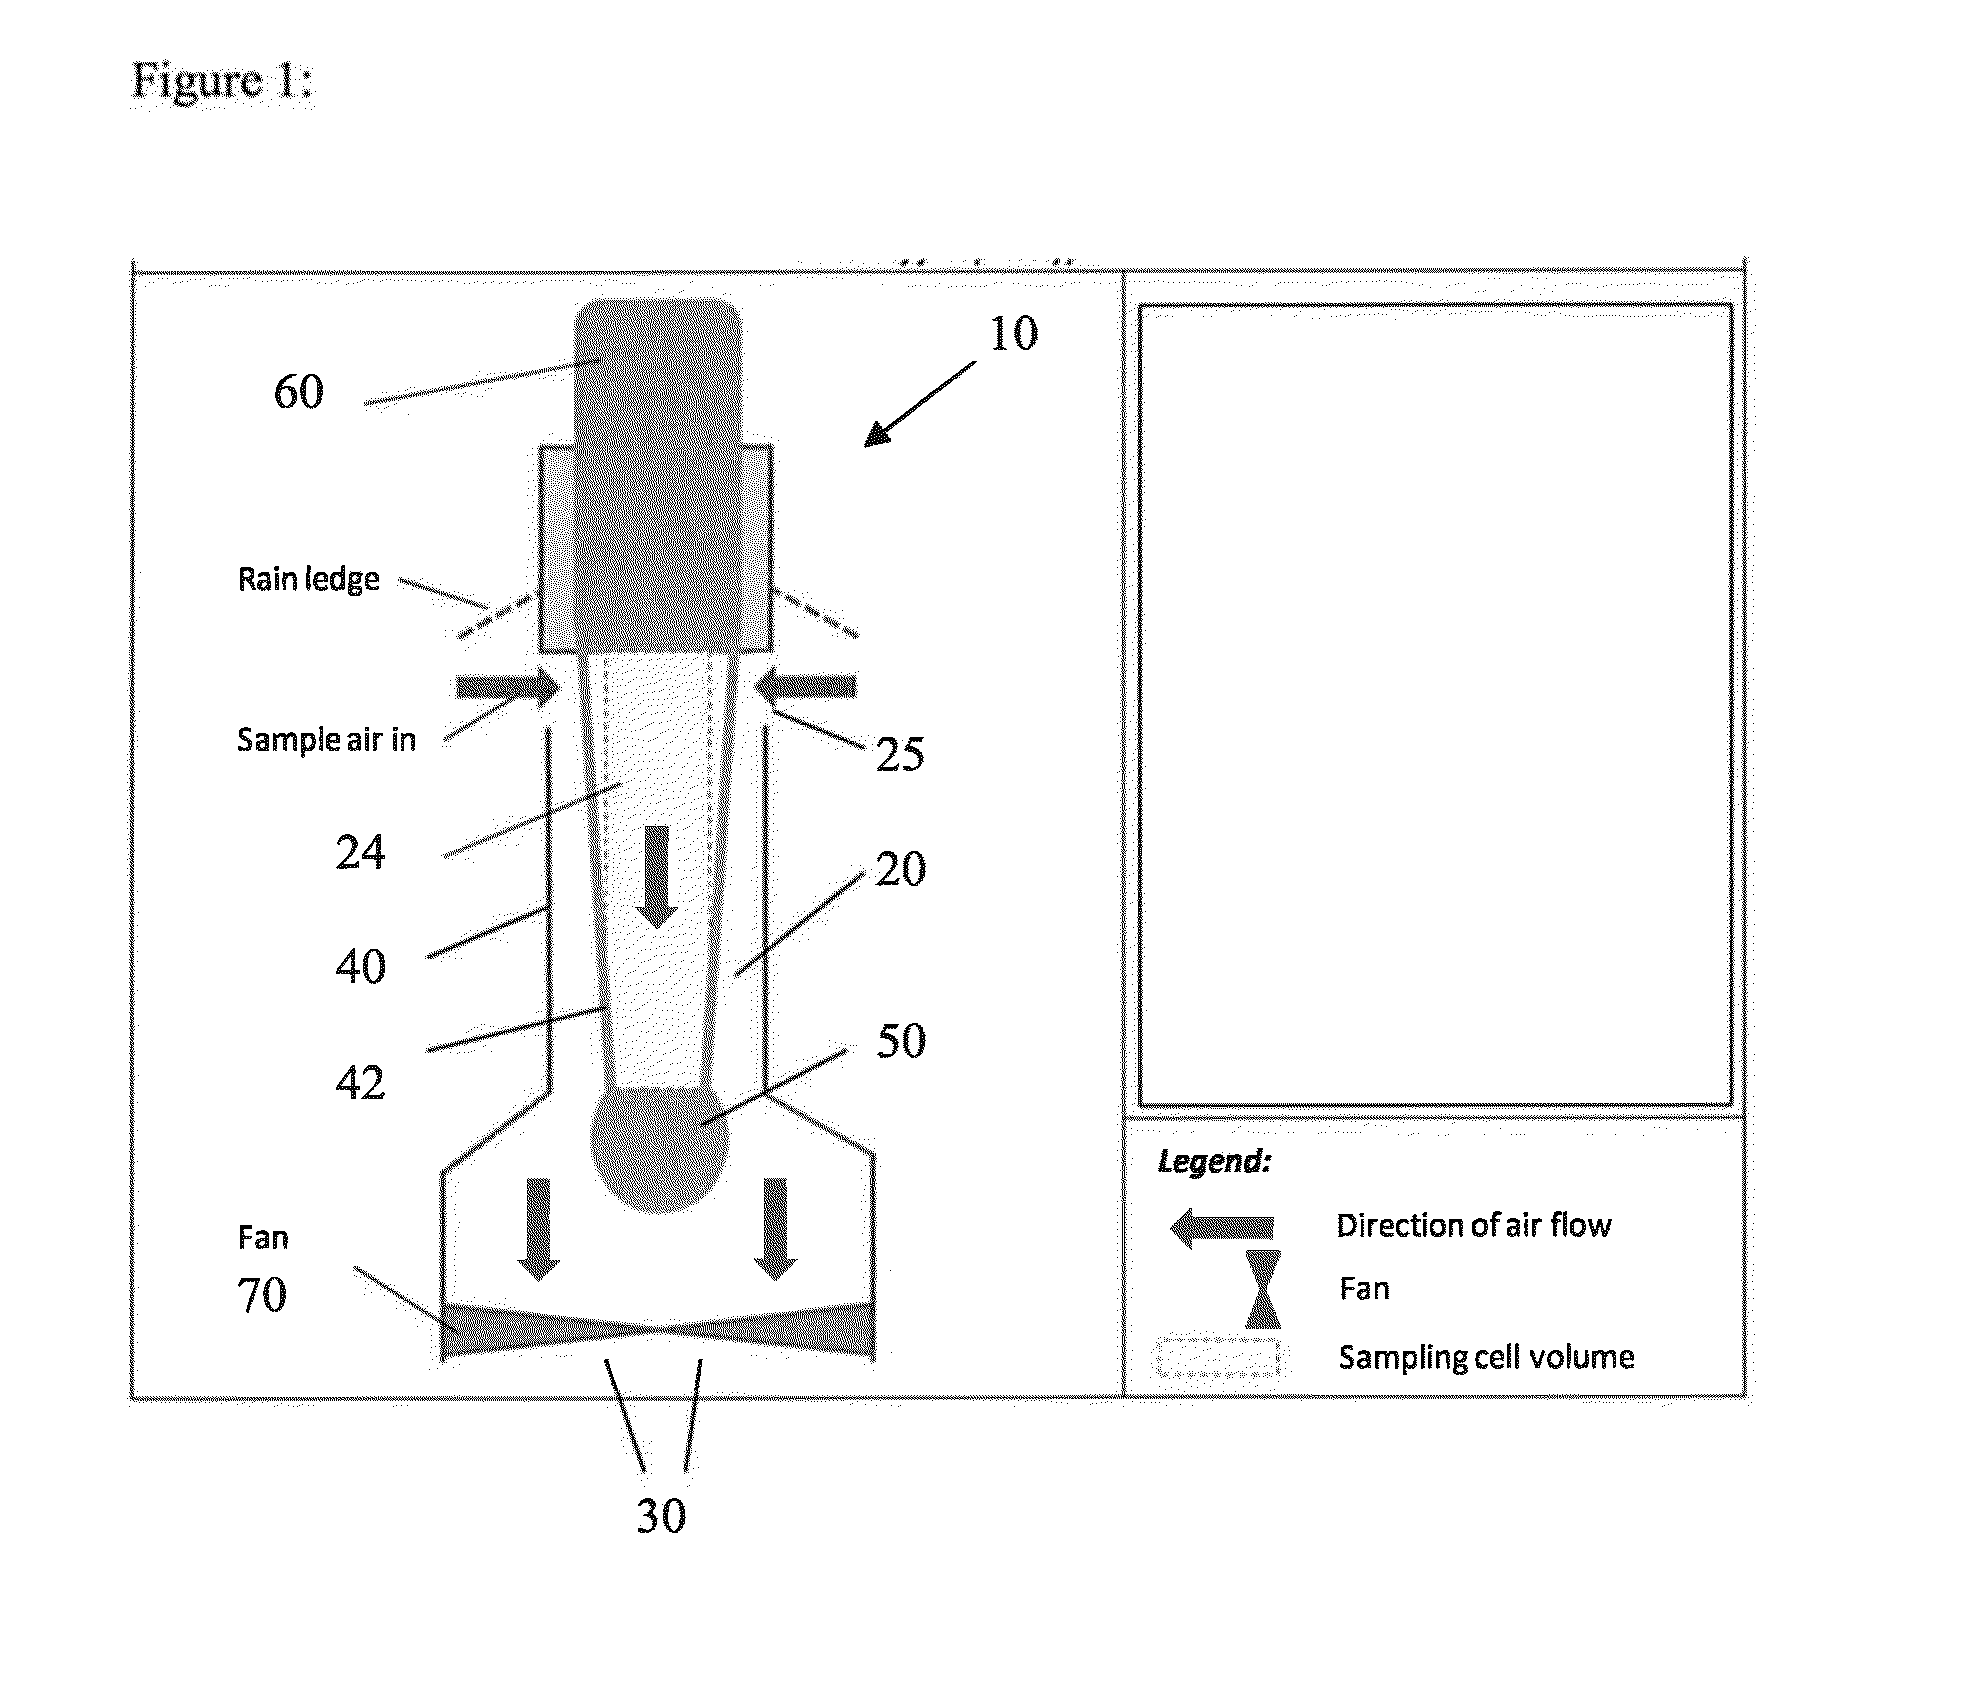 Semi-open-path gas analysis systems and methods